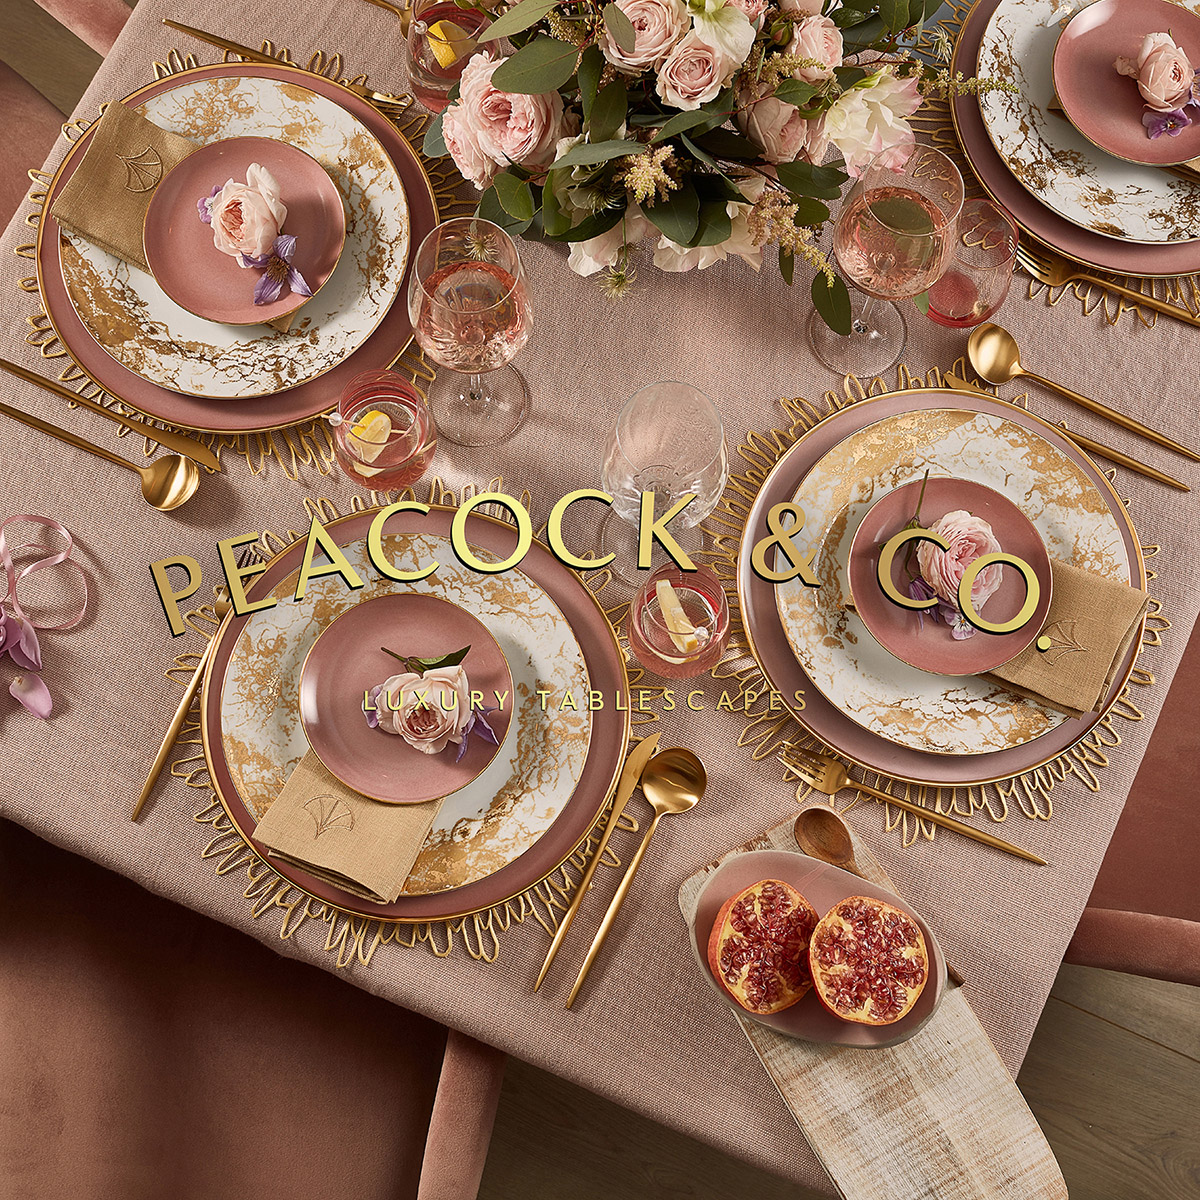 So Studio Designs New Luxury Tablescaping Brand for Peacock & Co.